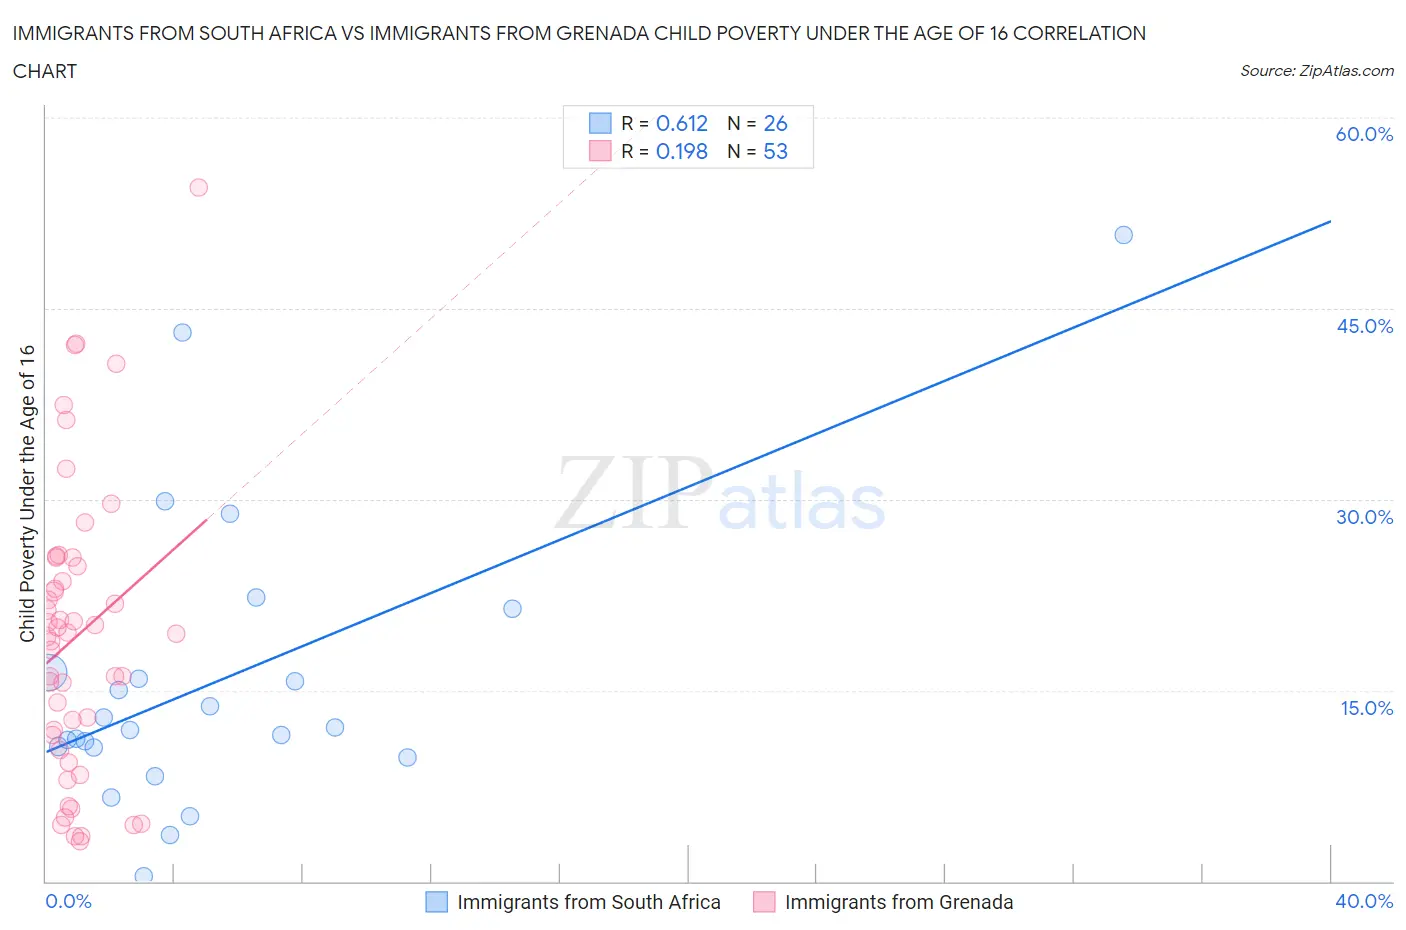 Immigrants from South Africa vs Immigrants from Grenada Child Poverty Under the Age of 16